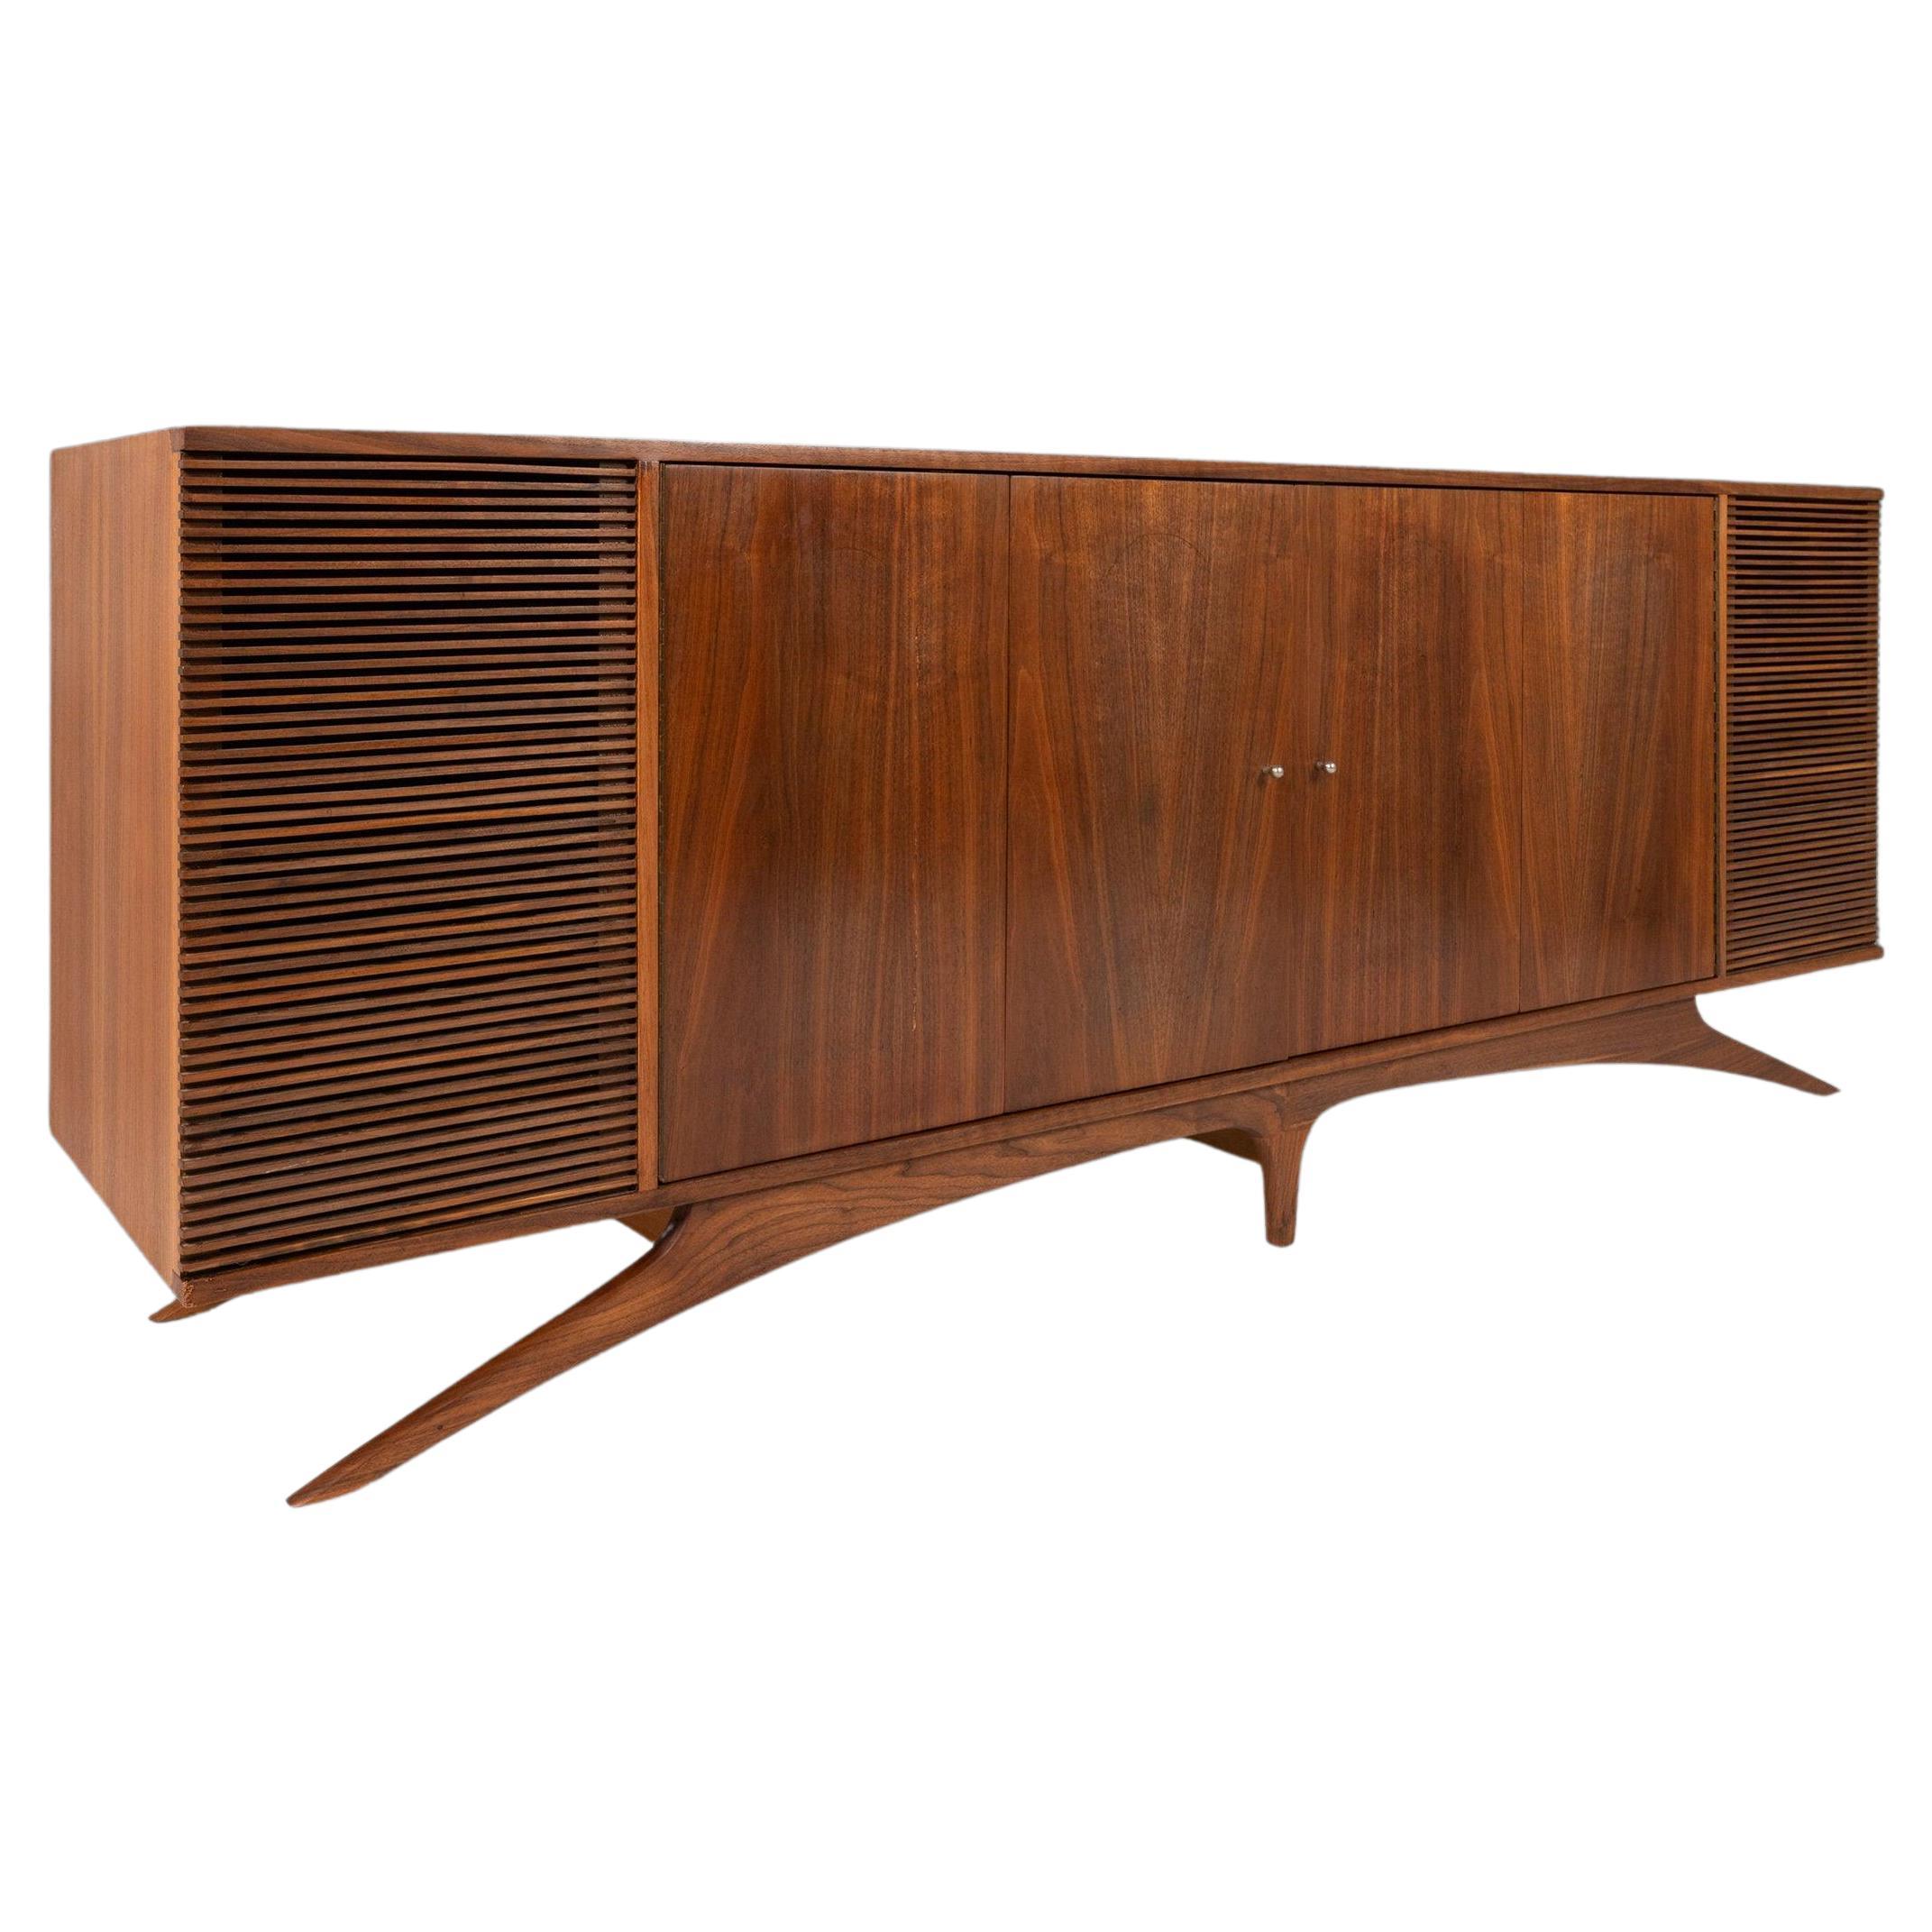 Credenza / Stereo Cabinet in Walnut in the Manner of Vladimir Kagan, USA, c  1960 at 1stDibs | old stereo cabinet